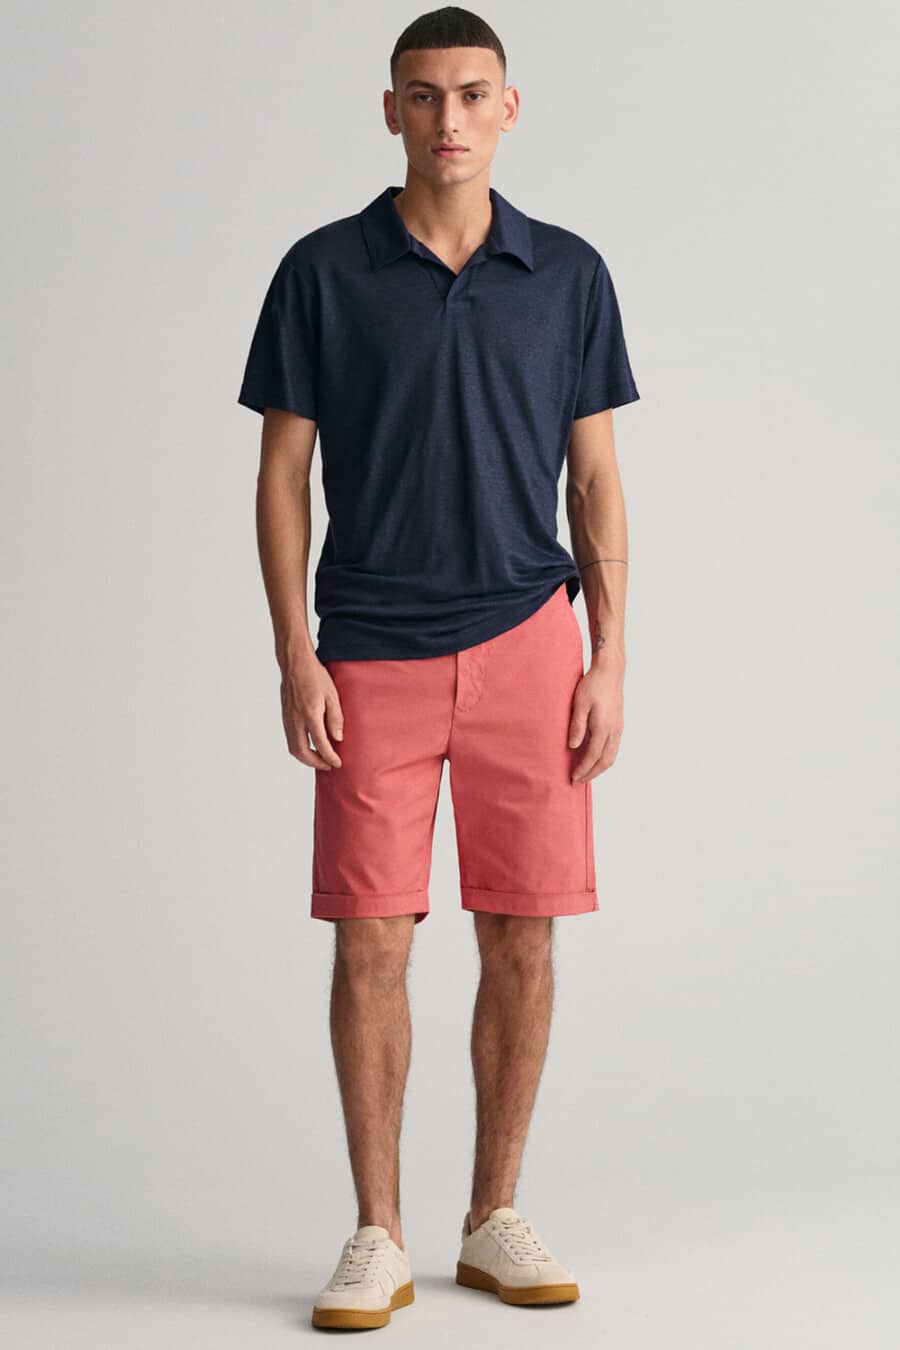 Men's coral pink chino shorts, navy polo shirt and cream gum sole sneakers outfit